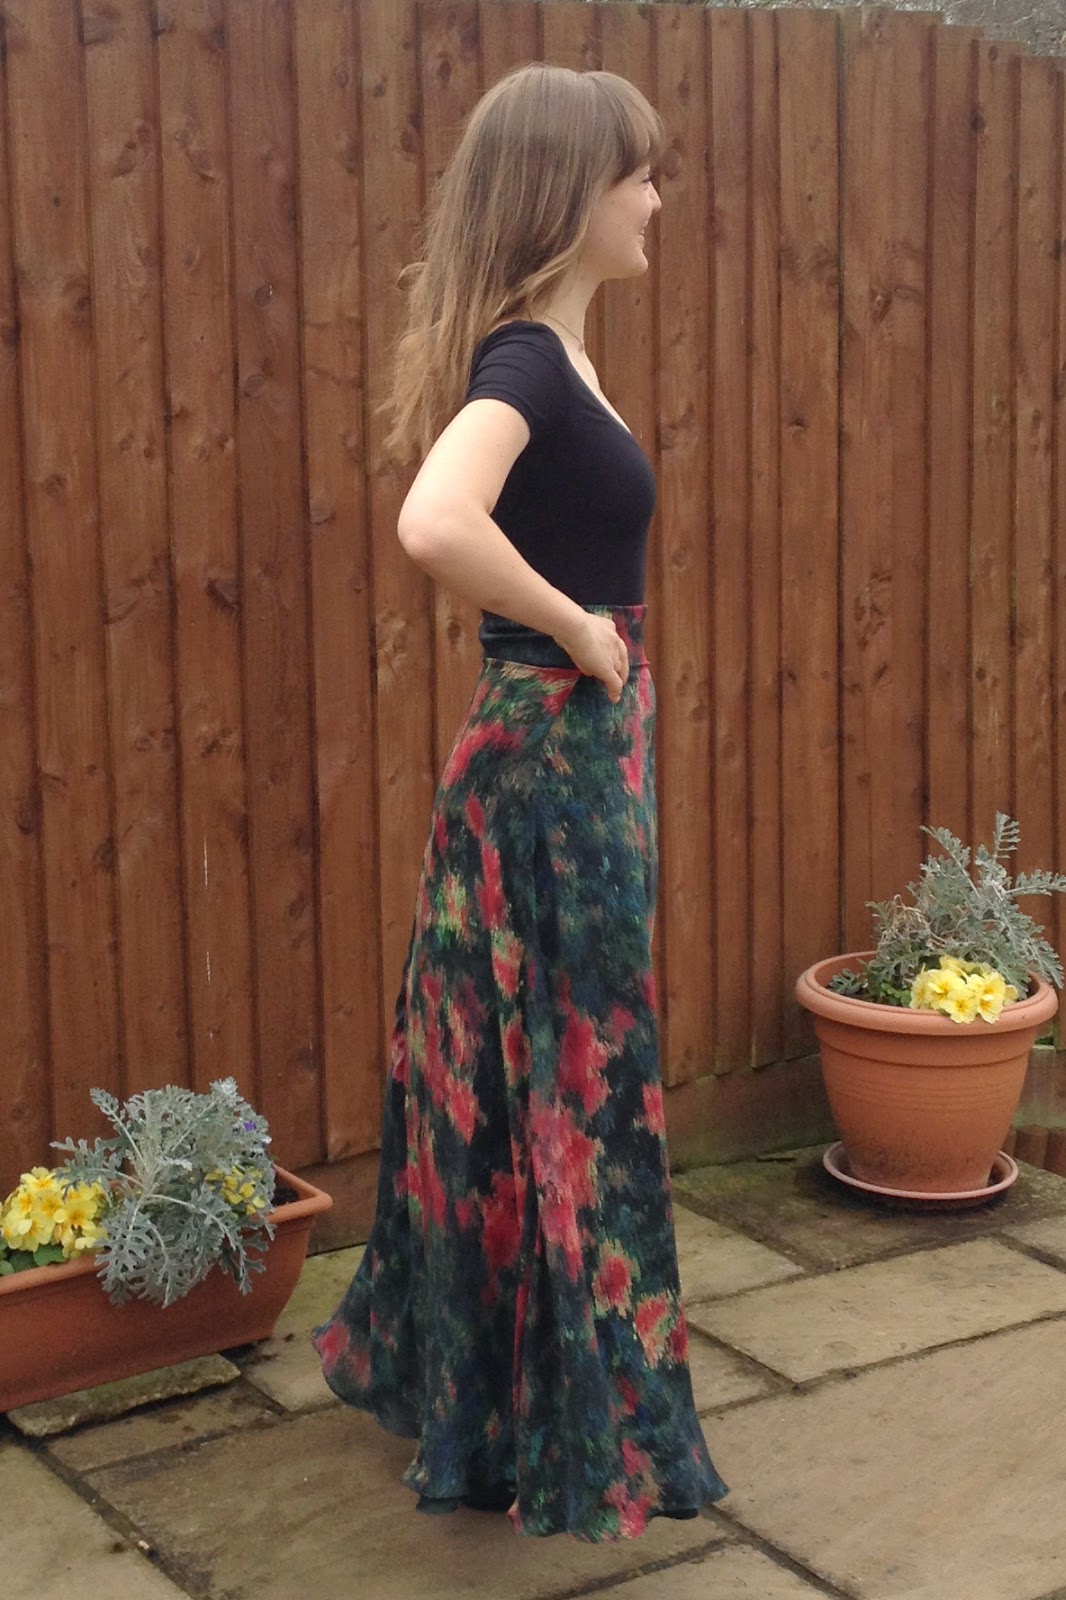 Diary of a Chain Stitcher: Printed Silk Maxi Skirt and Bamboo Jersey Bodysuit with Mood Fabrics